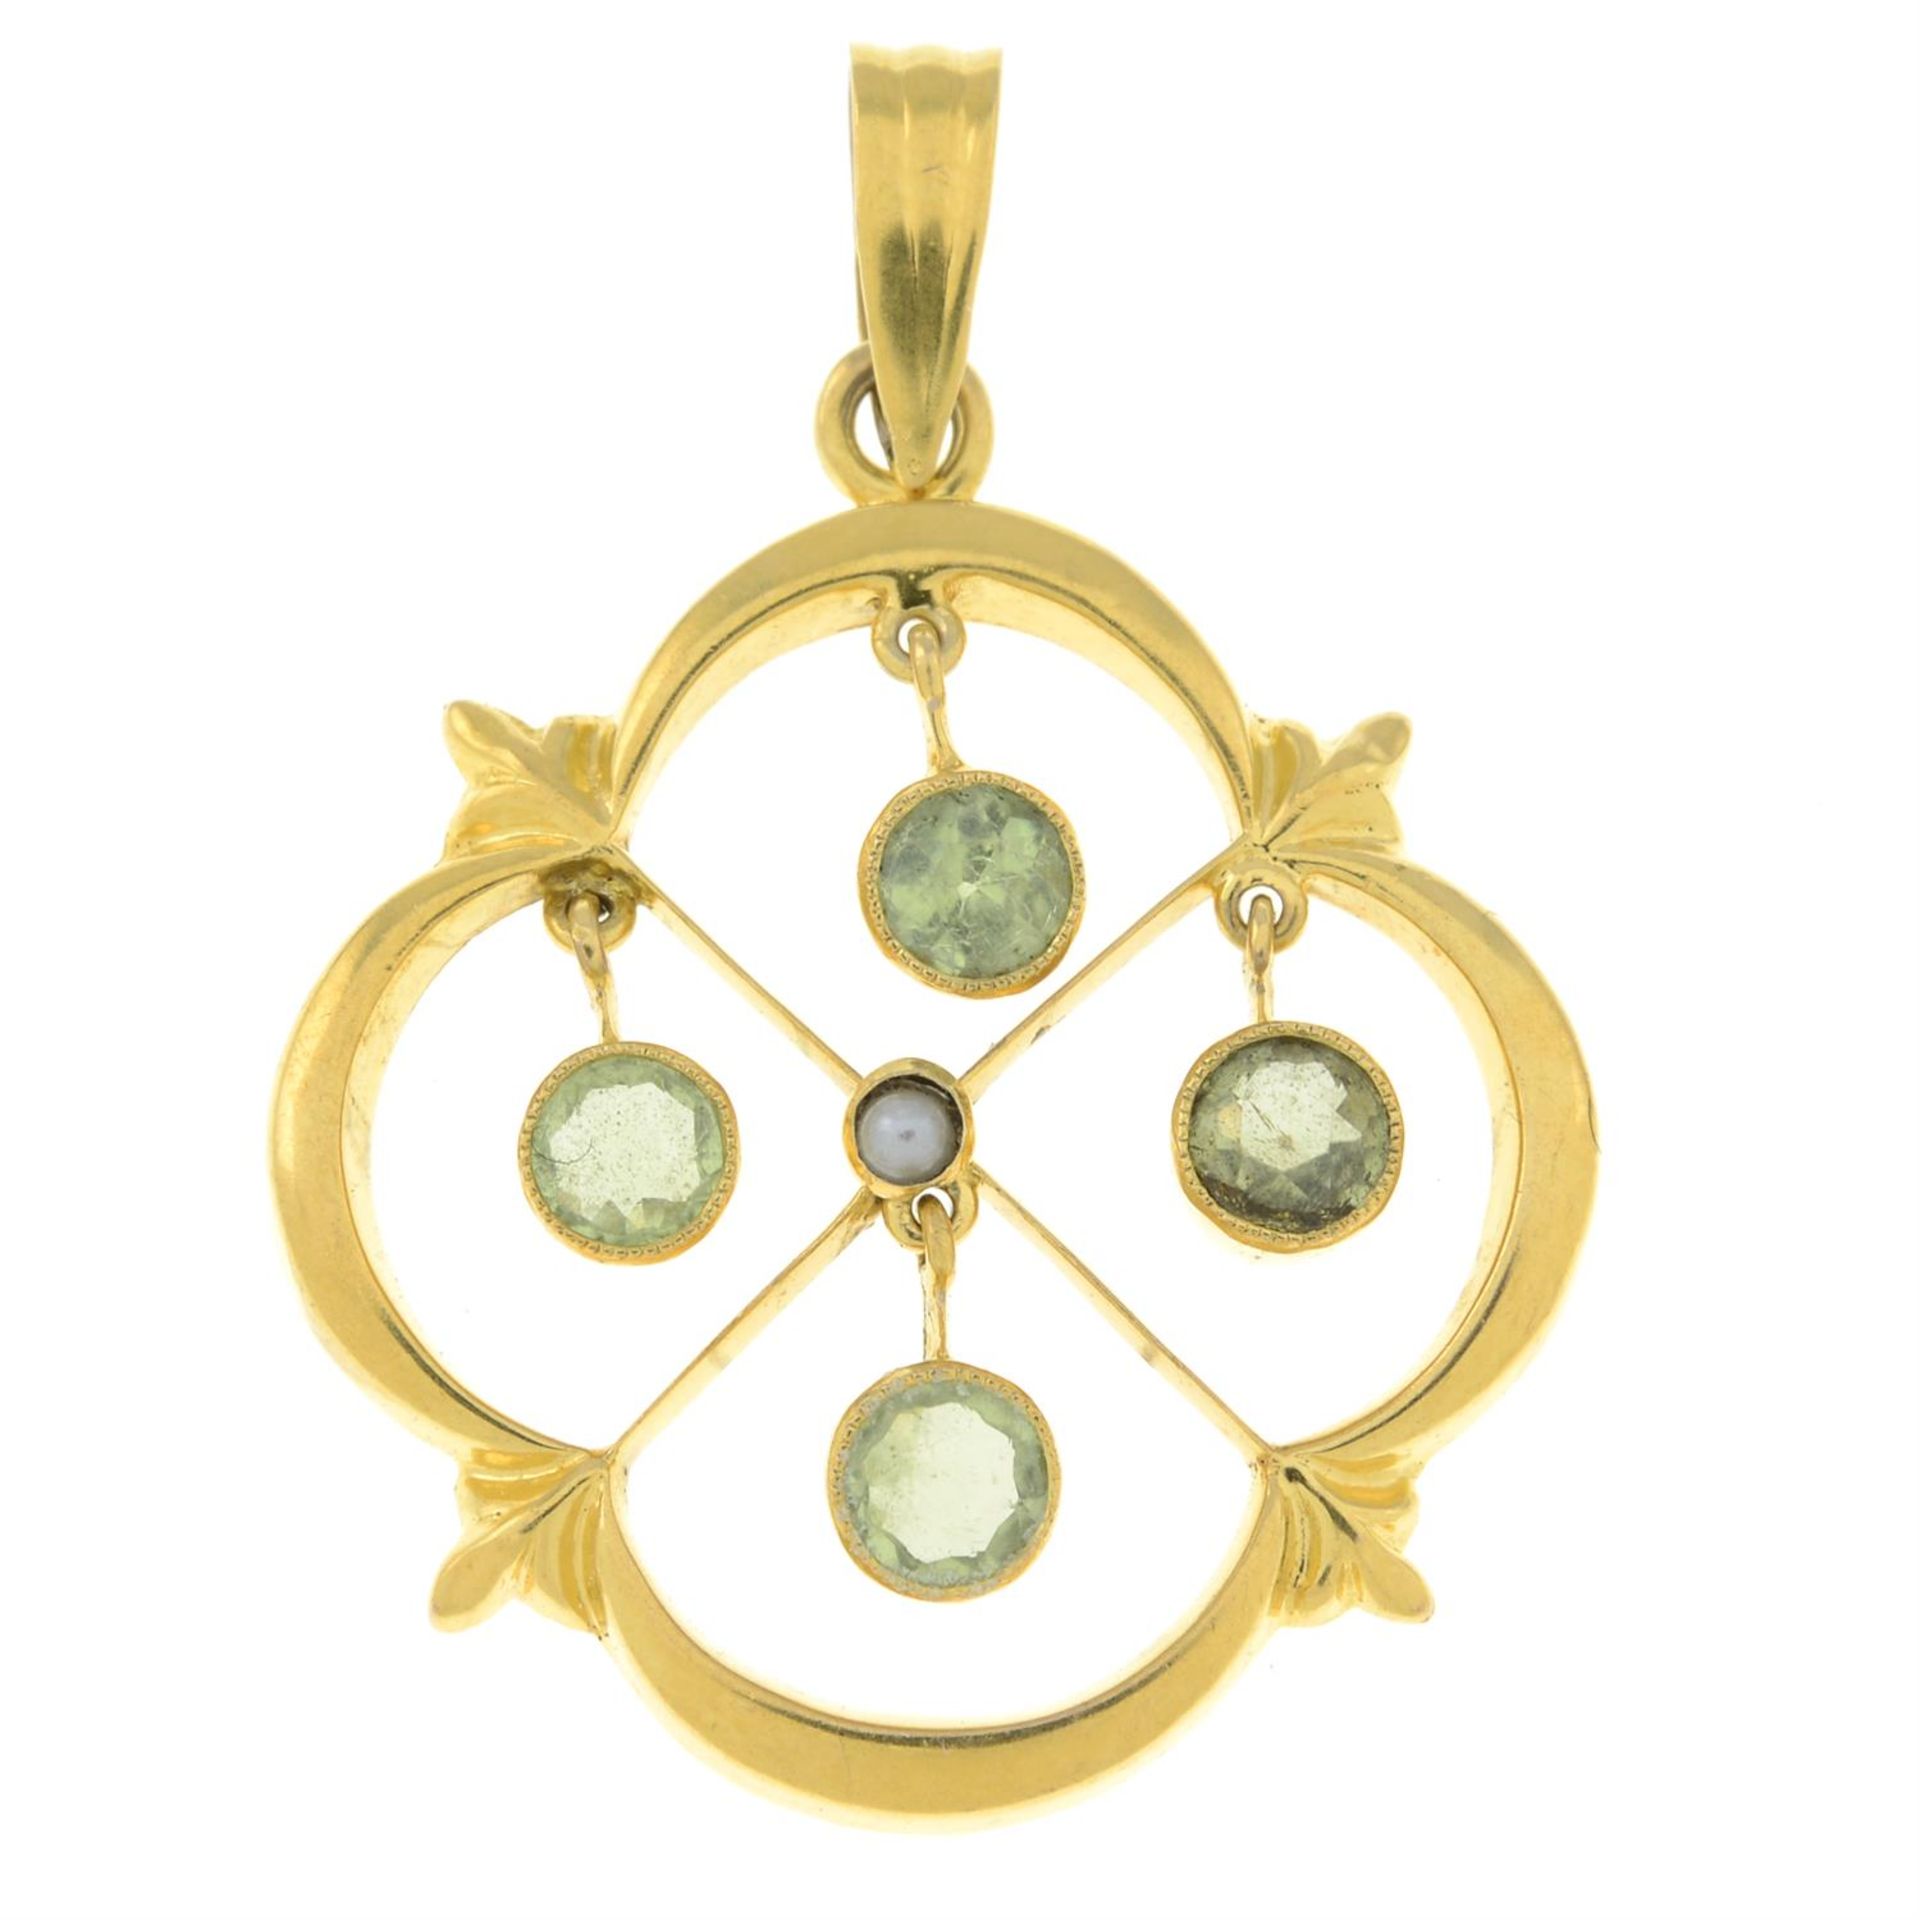 An early 20th century 9ct gold chrysoberyl and split pearl pendant.